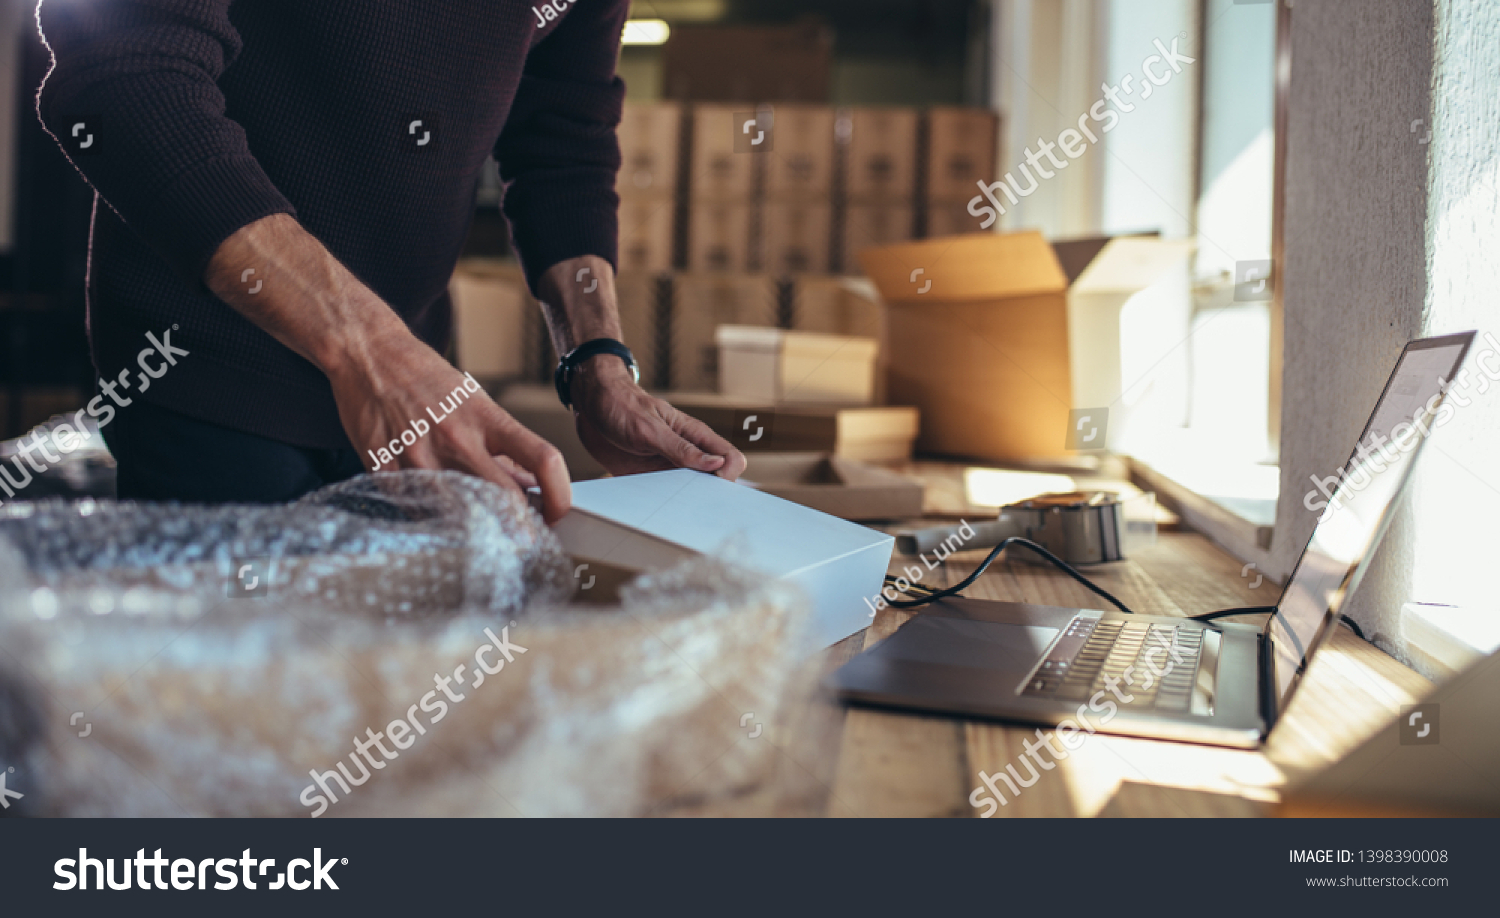 Small business owner packing in the cardbox at workplace. Cropped shot of man preparing a parcel for delivery at online selling business office. #1398390008